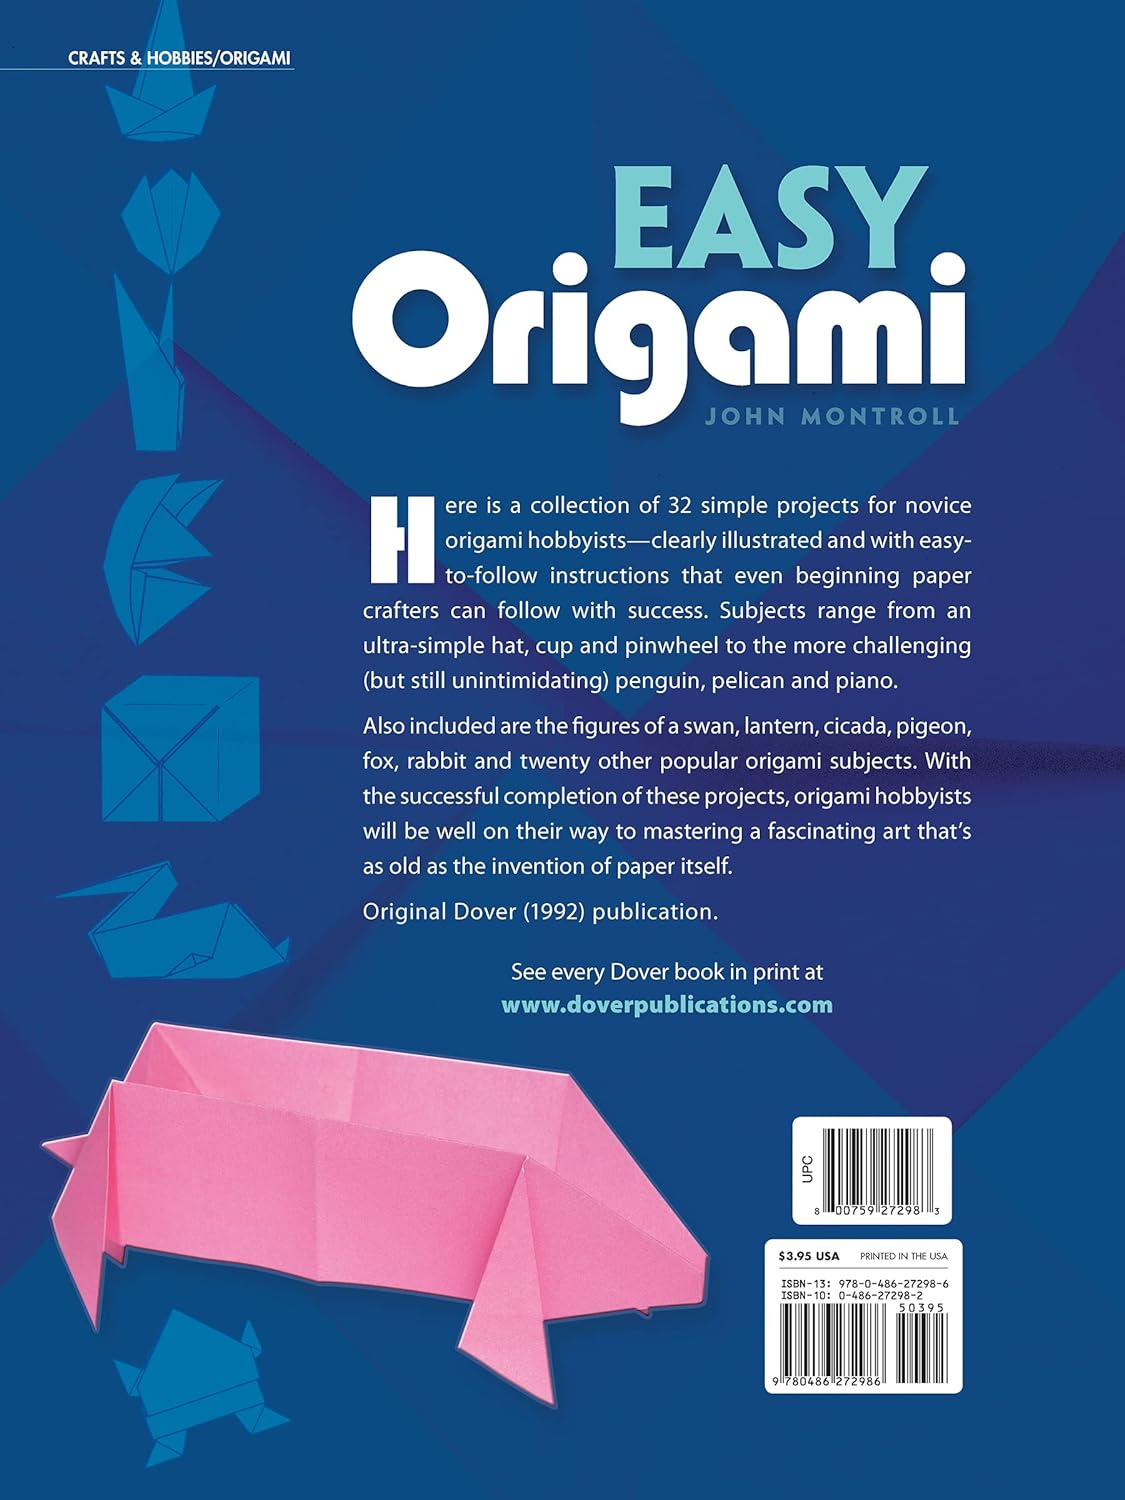 Easy Origami : Over 30 simple projects (John Montroll)